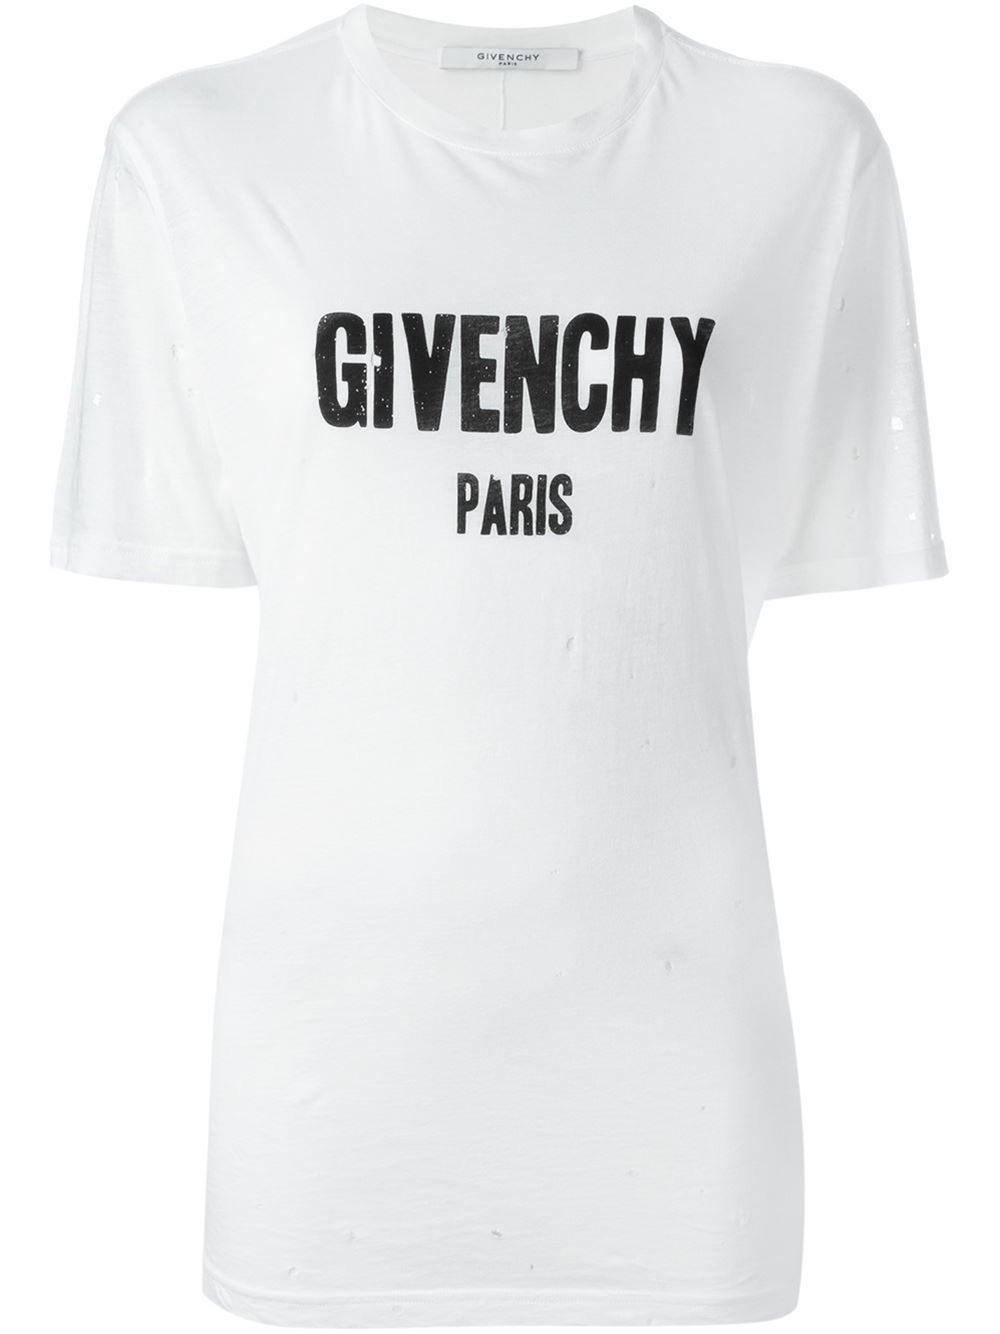 Givenchy Distressed Logo T-shirt in White | Lyst